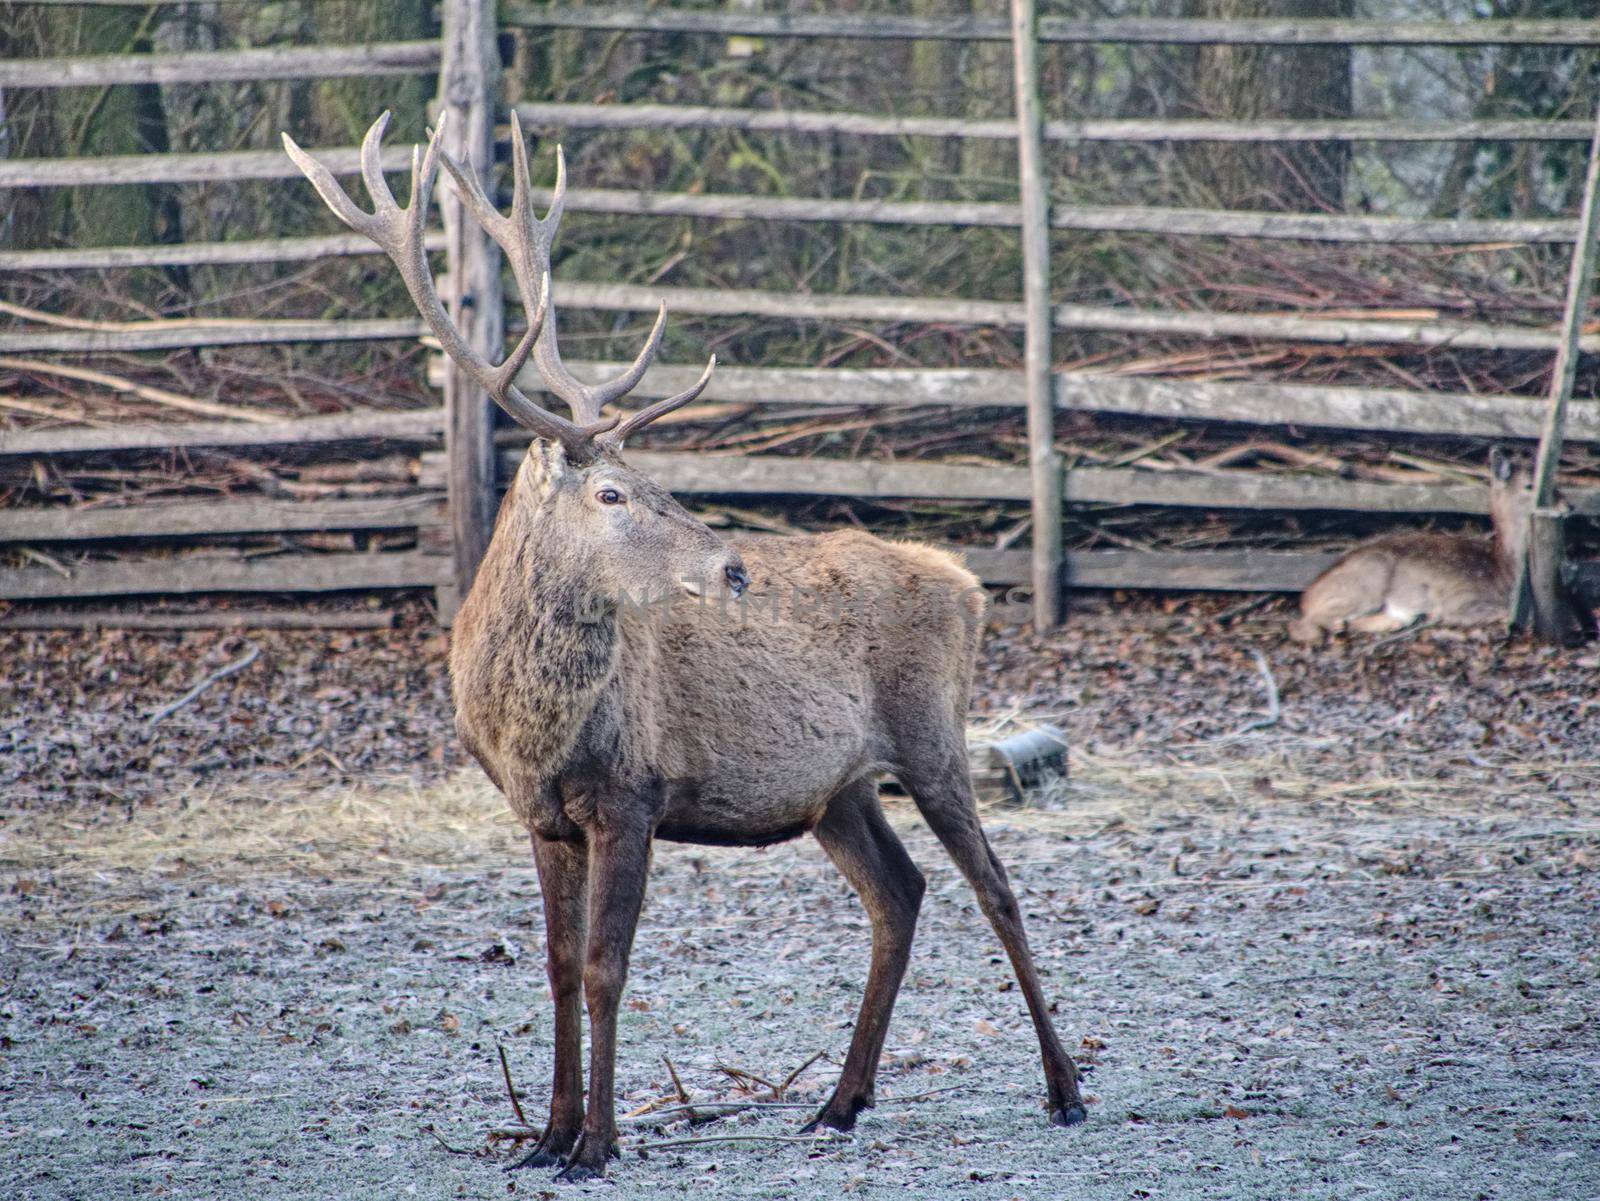 Red deer ( Cervus elaphus ) at wooden fence in rutting season. The hoarfrost on the ground with fallen leaves.